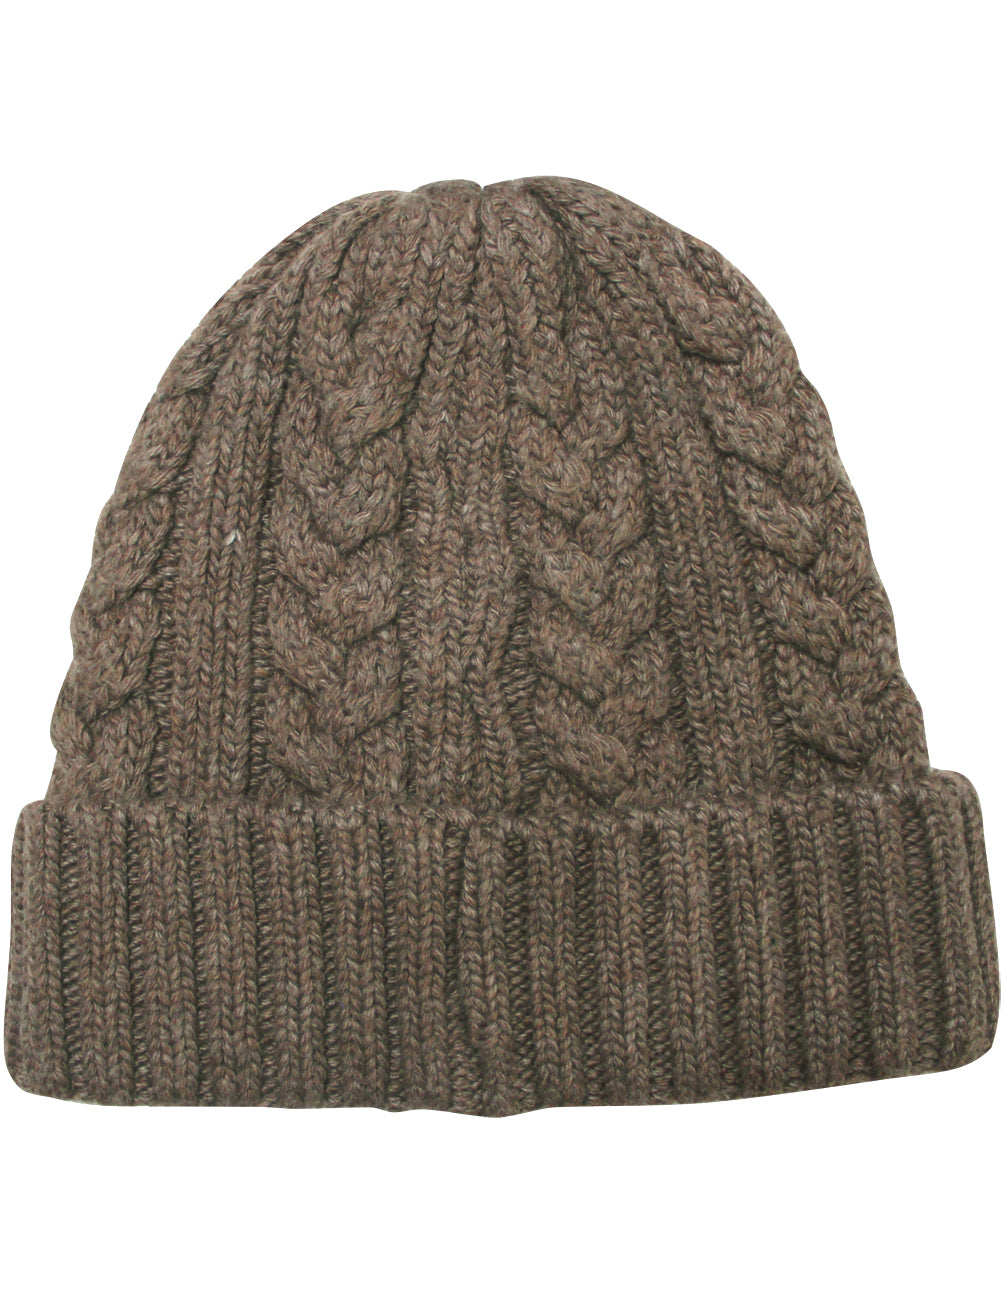 Dahlia's Cable Knit/Slouchy Style/Dual-Layer Beanie, Soft & Warm Hat